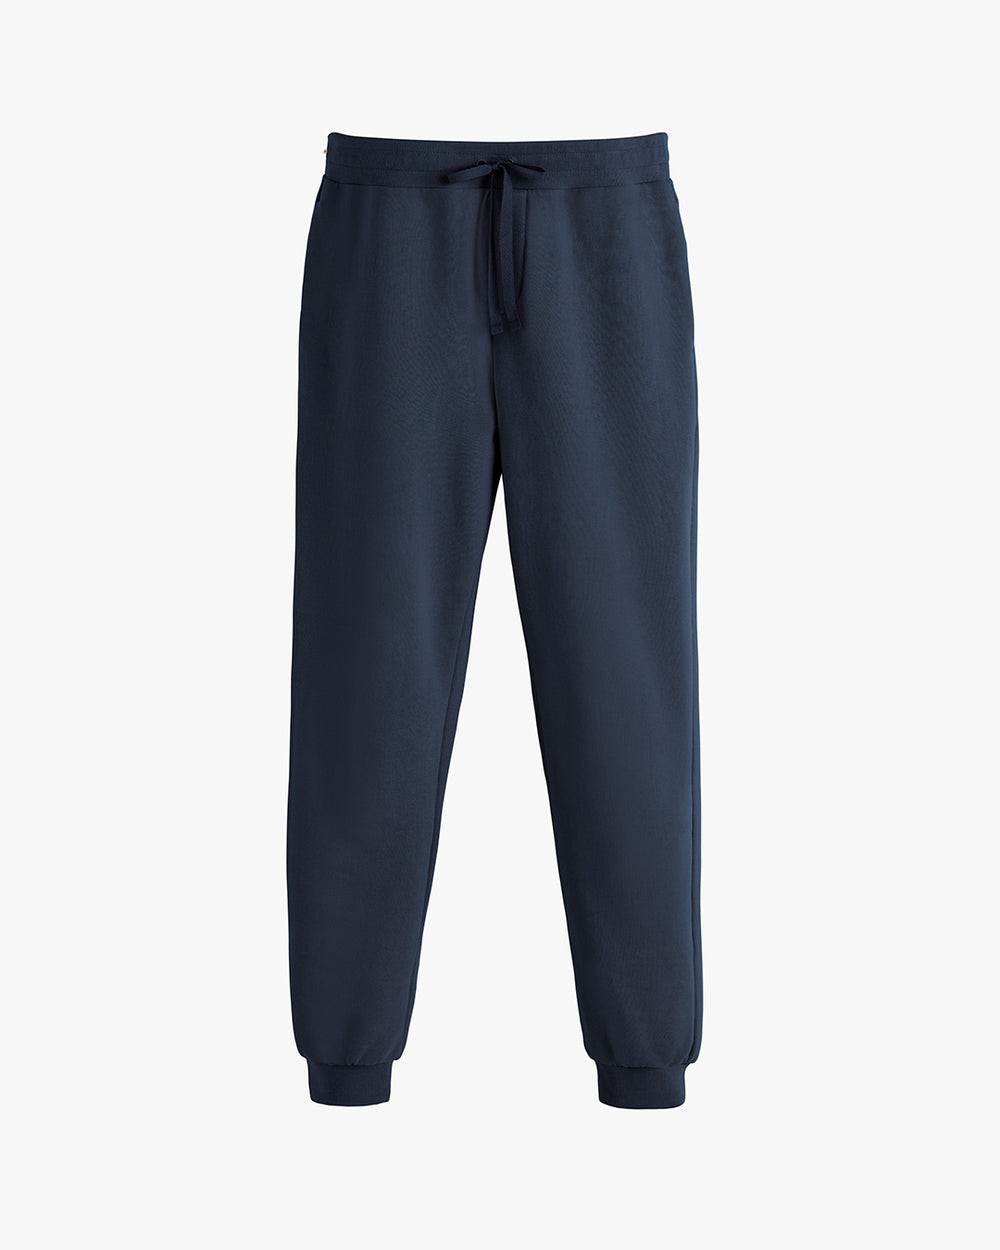 Sweatpants with elastic waistband and drawstring, no model.